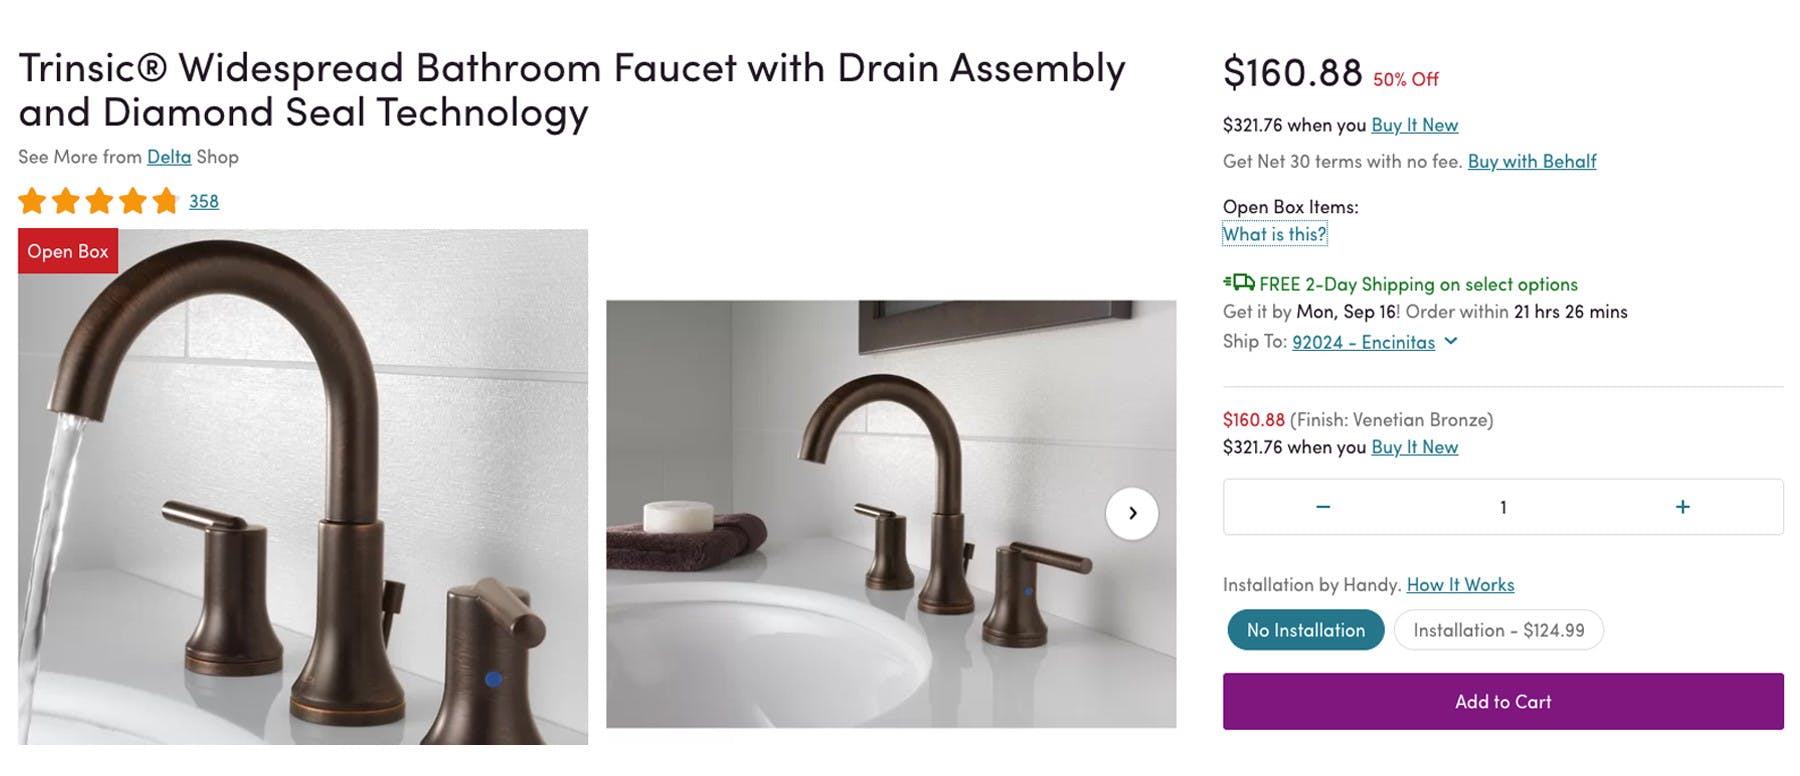 18 Hacks And Tips For Winning All The Wayfair Deals The Krazy